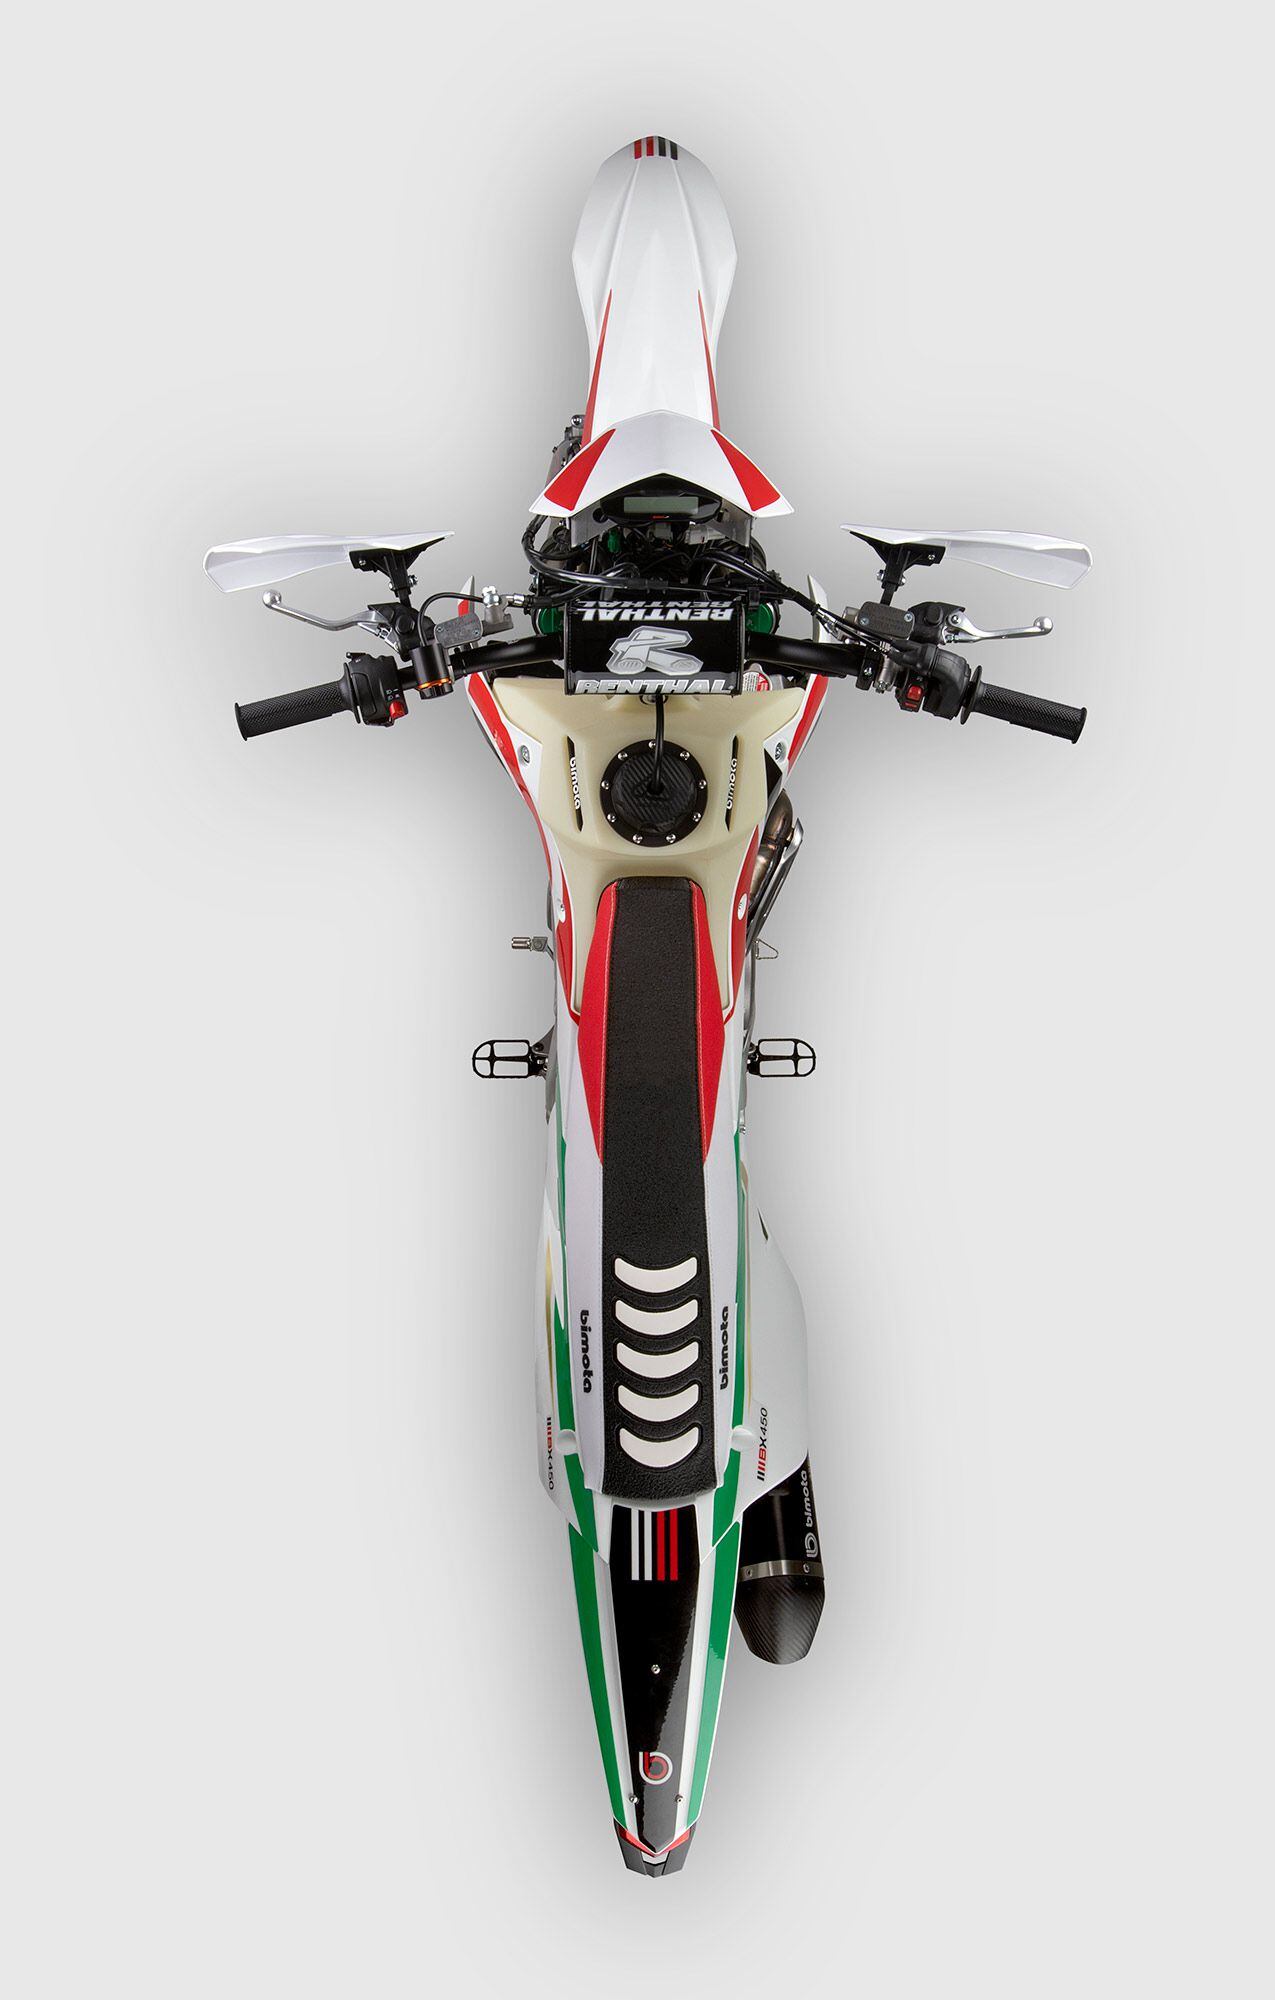 This shows you how slim the Bimota BX450 is.